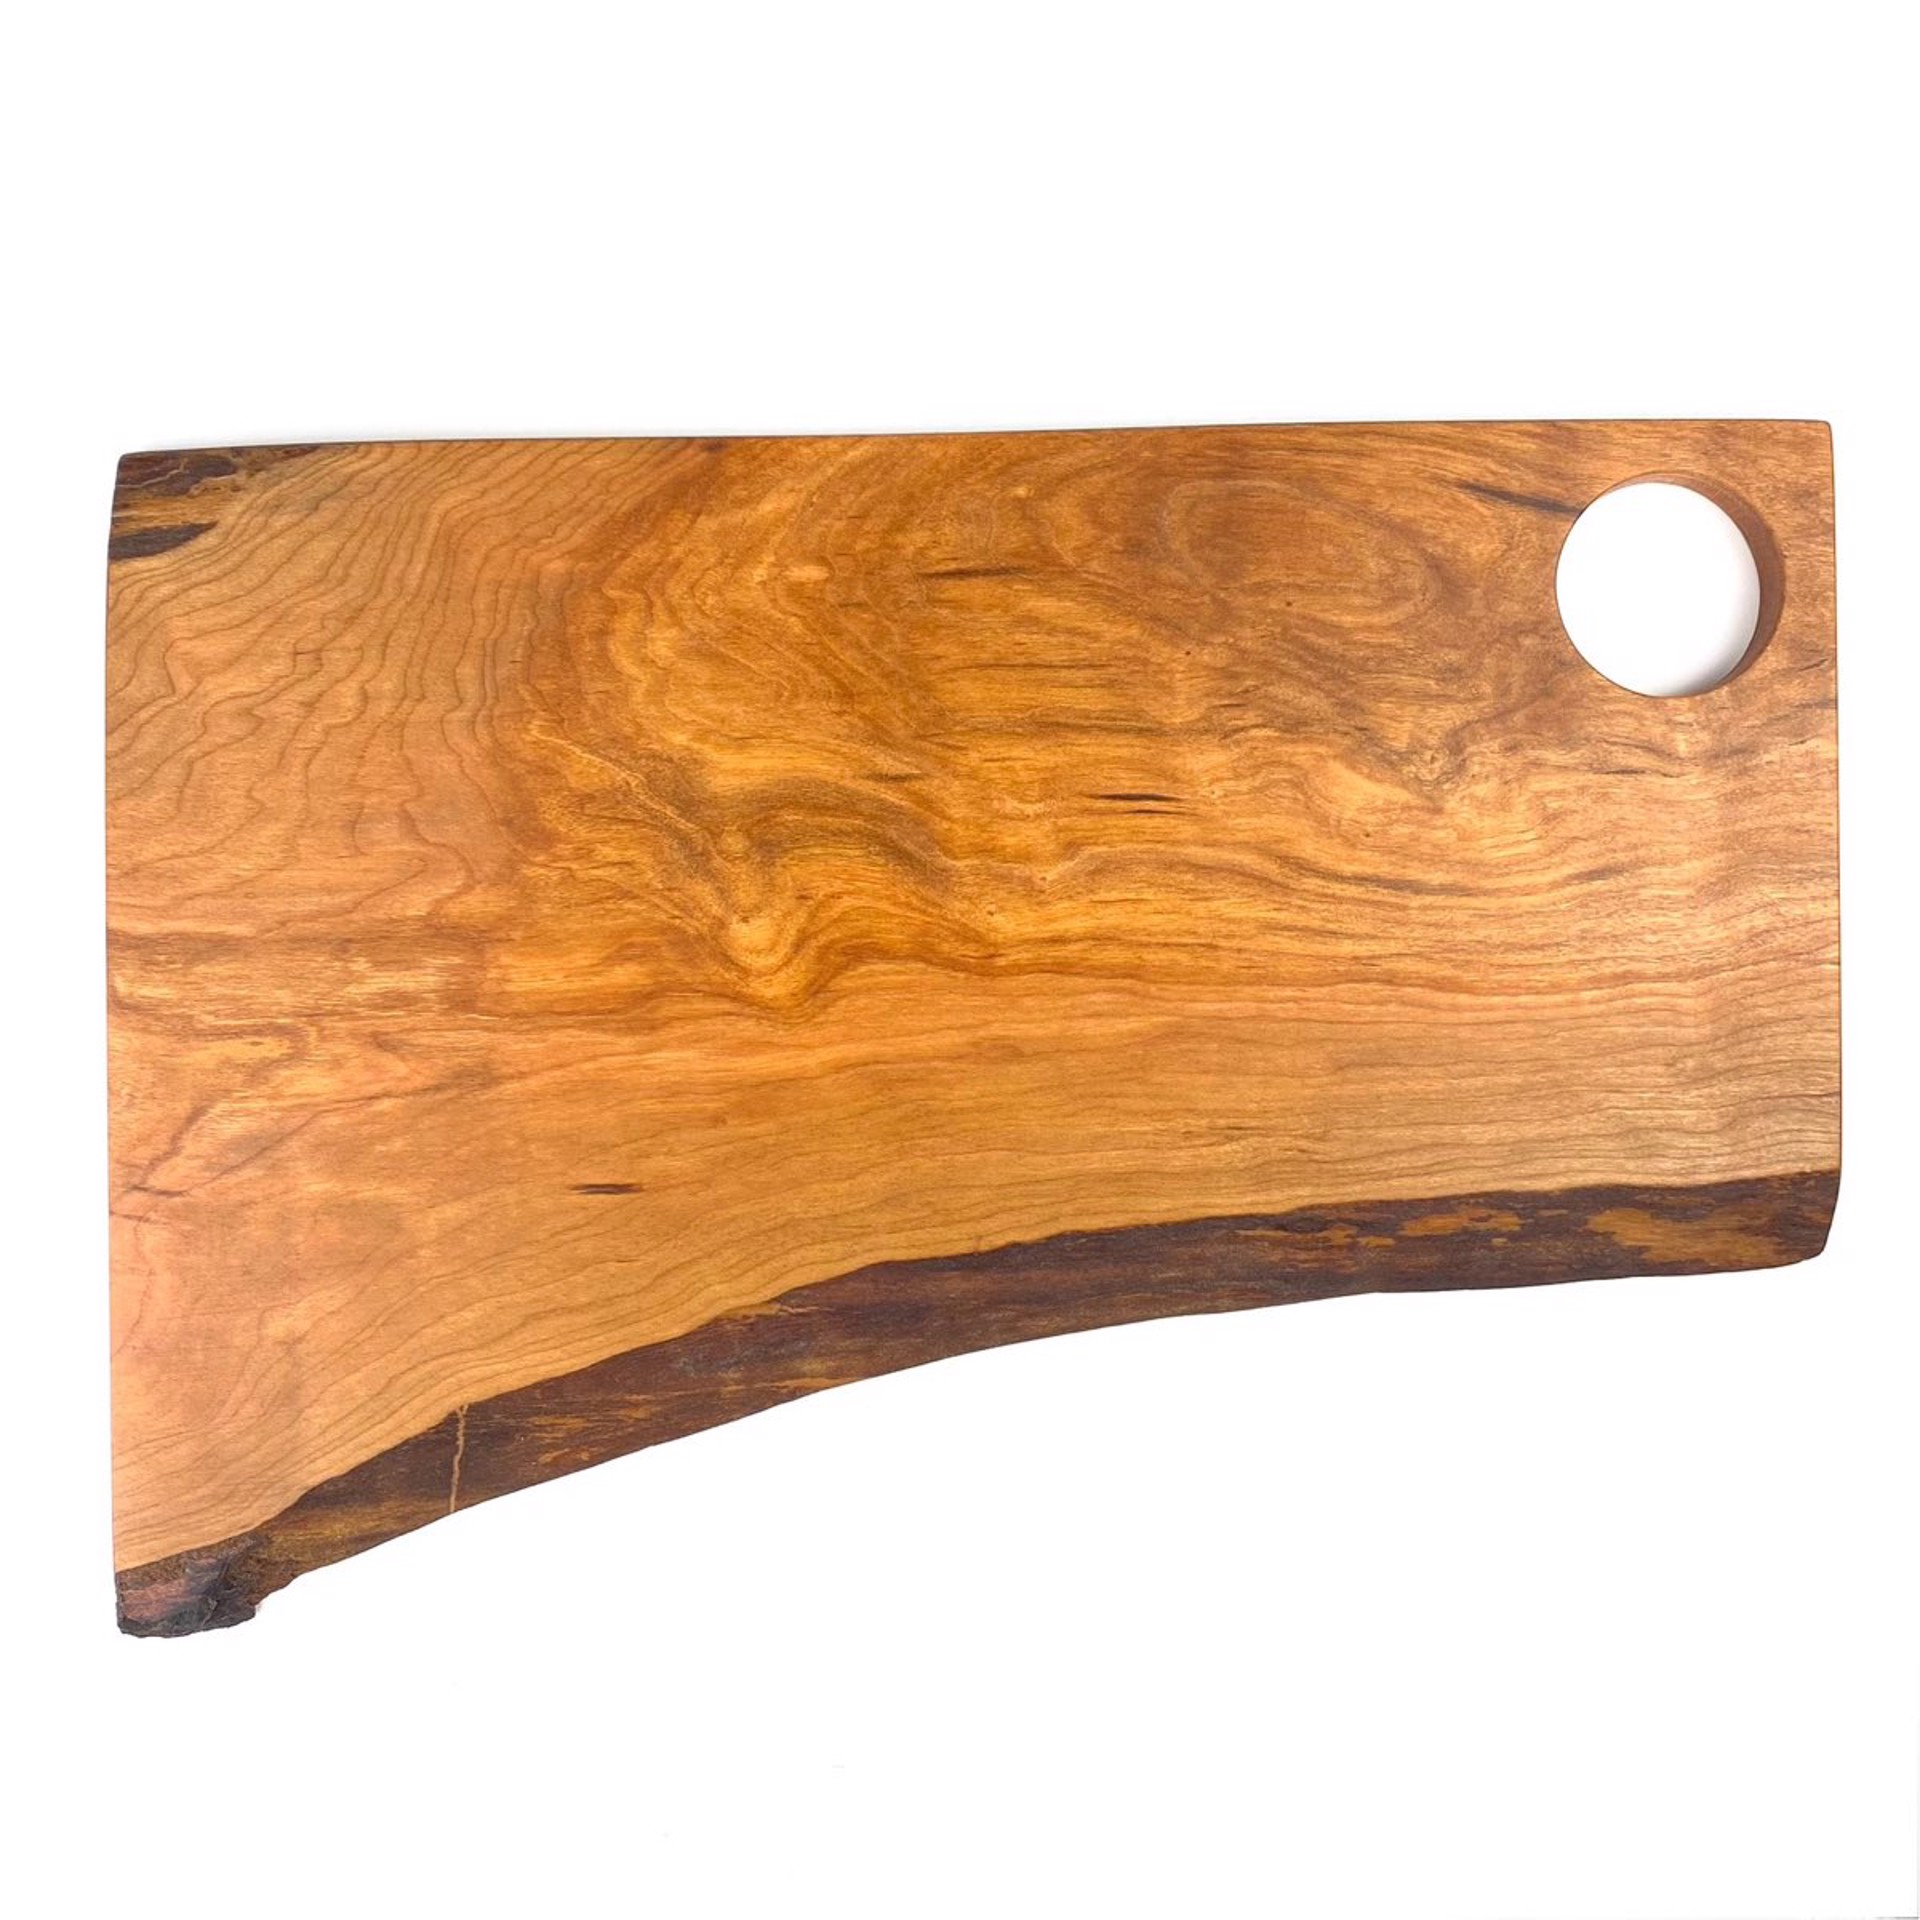 Live Edge Cherry Board with Hole by Jon Cordes